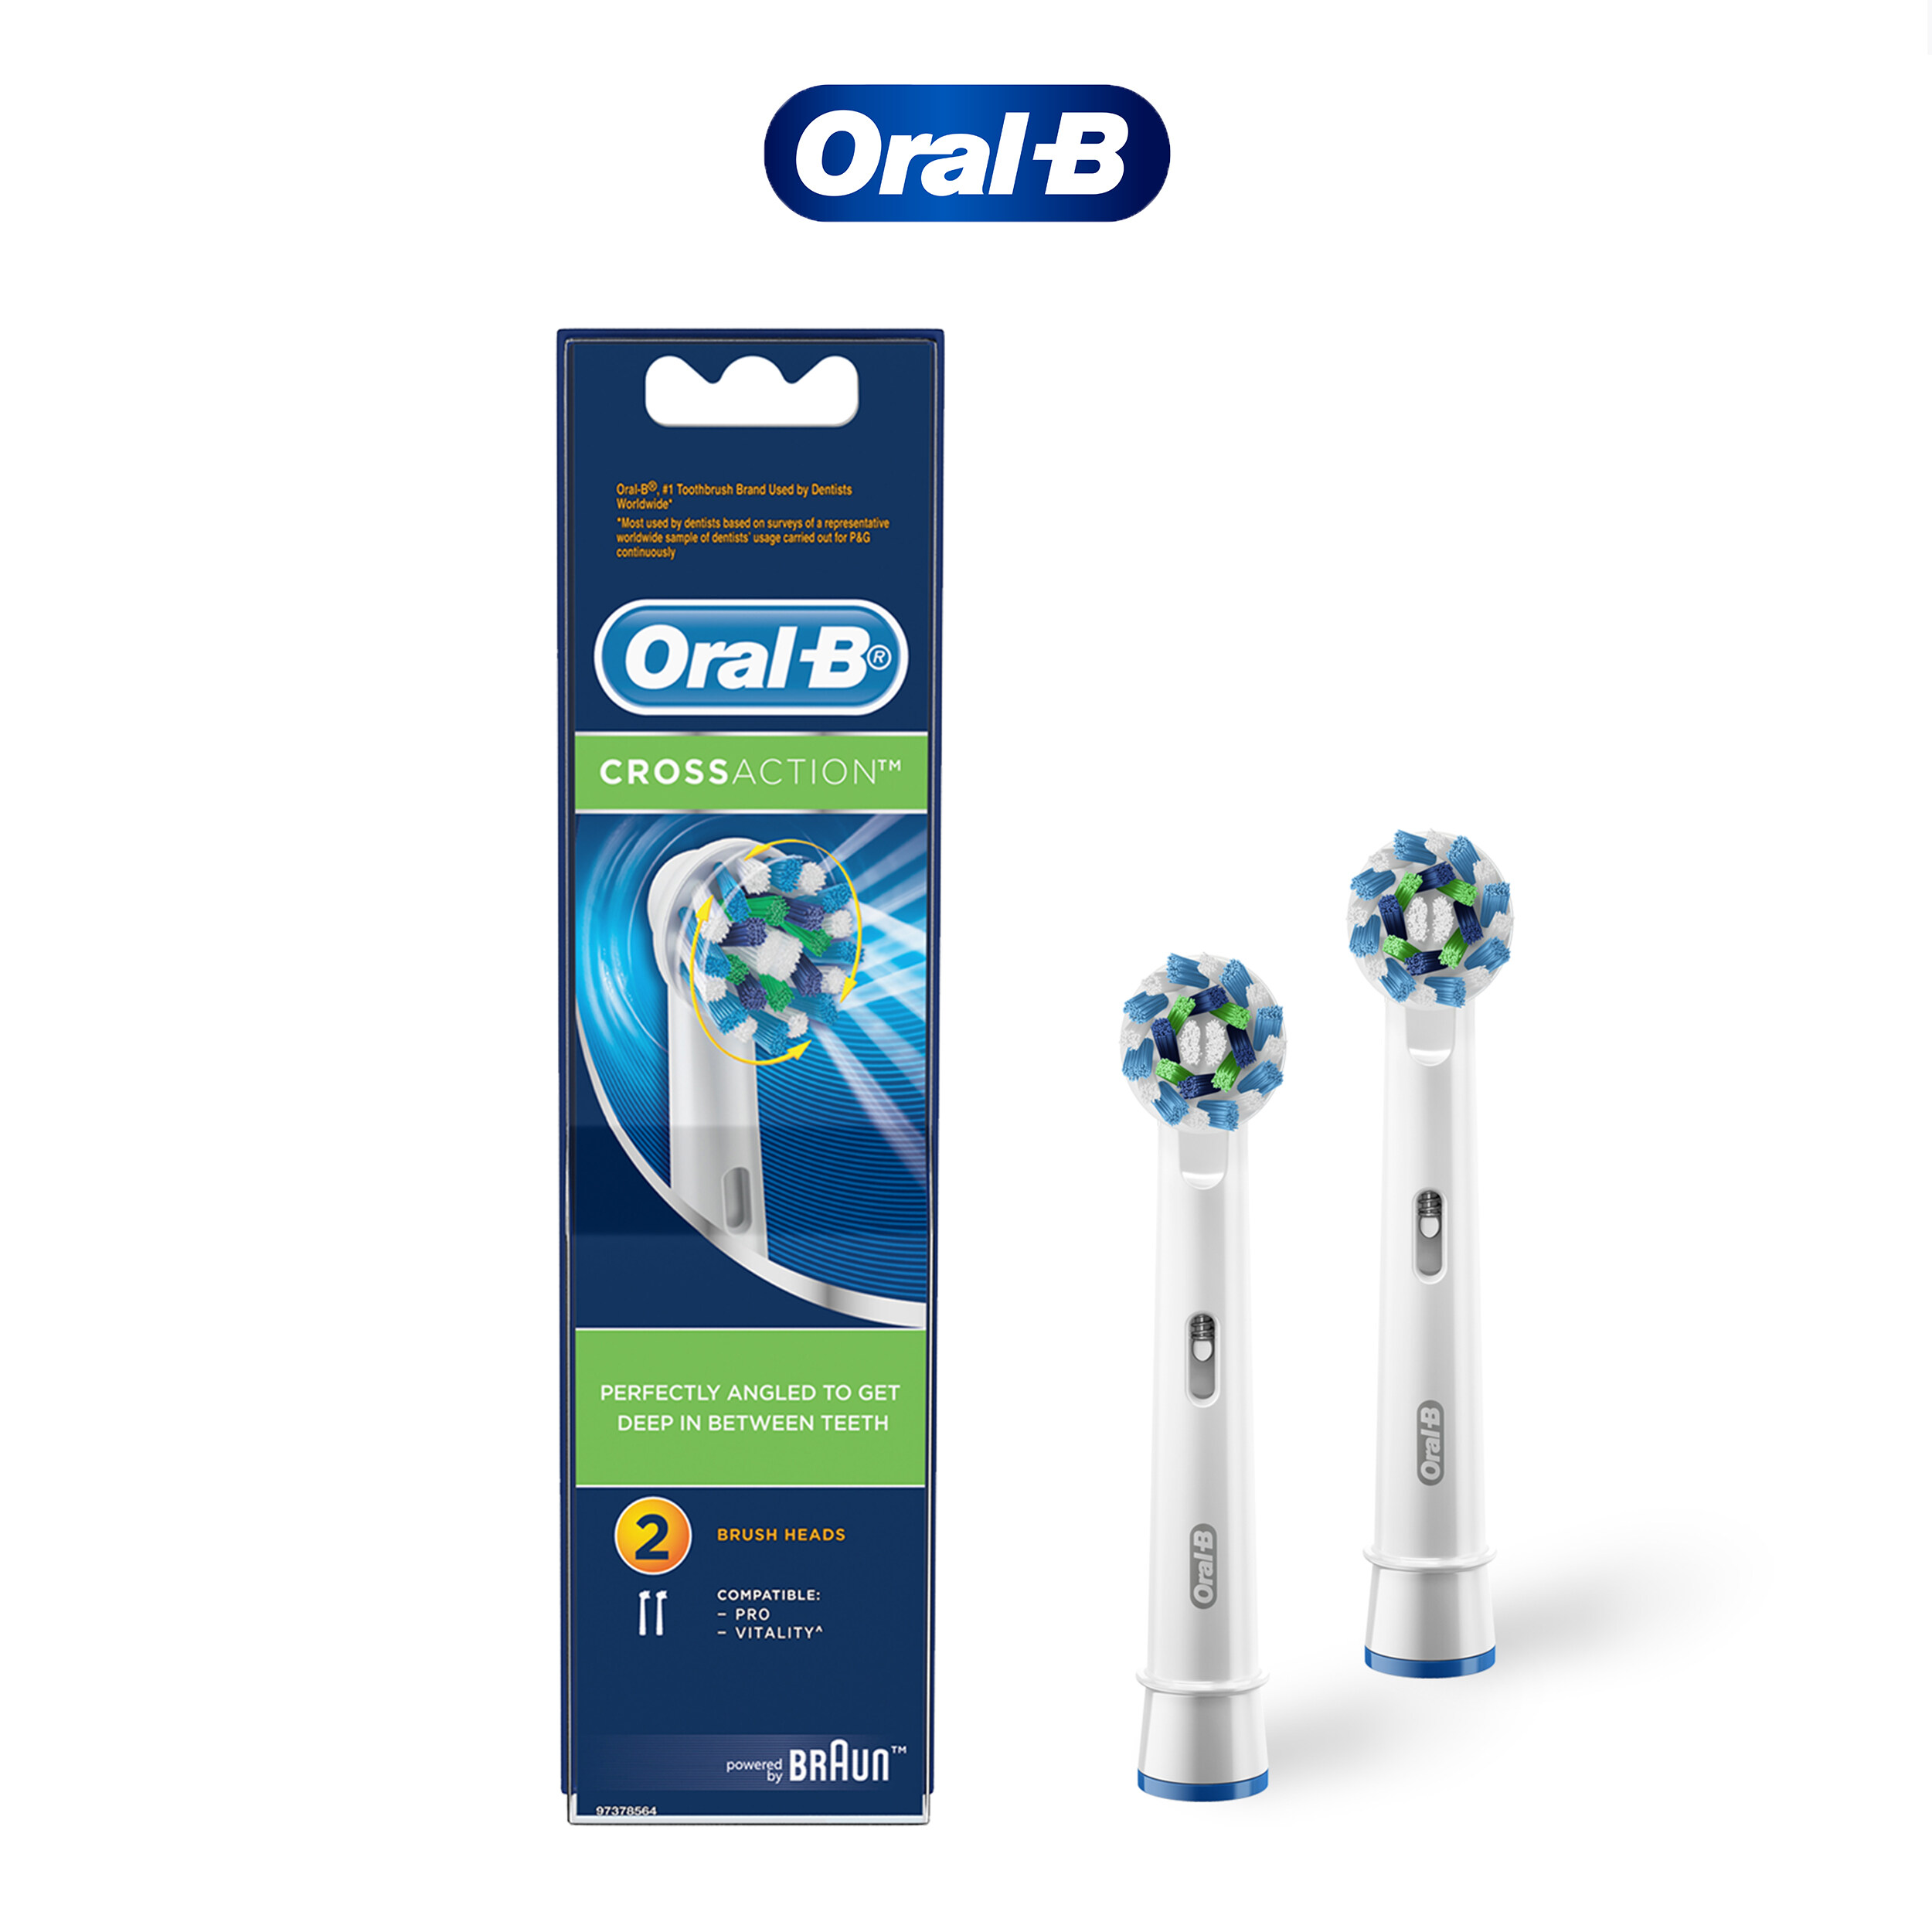 Oral-B Power Brush Set CrossAction Refill 2 Count